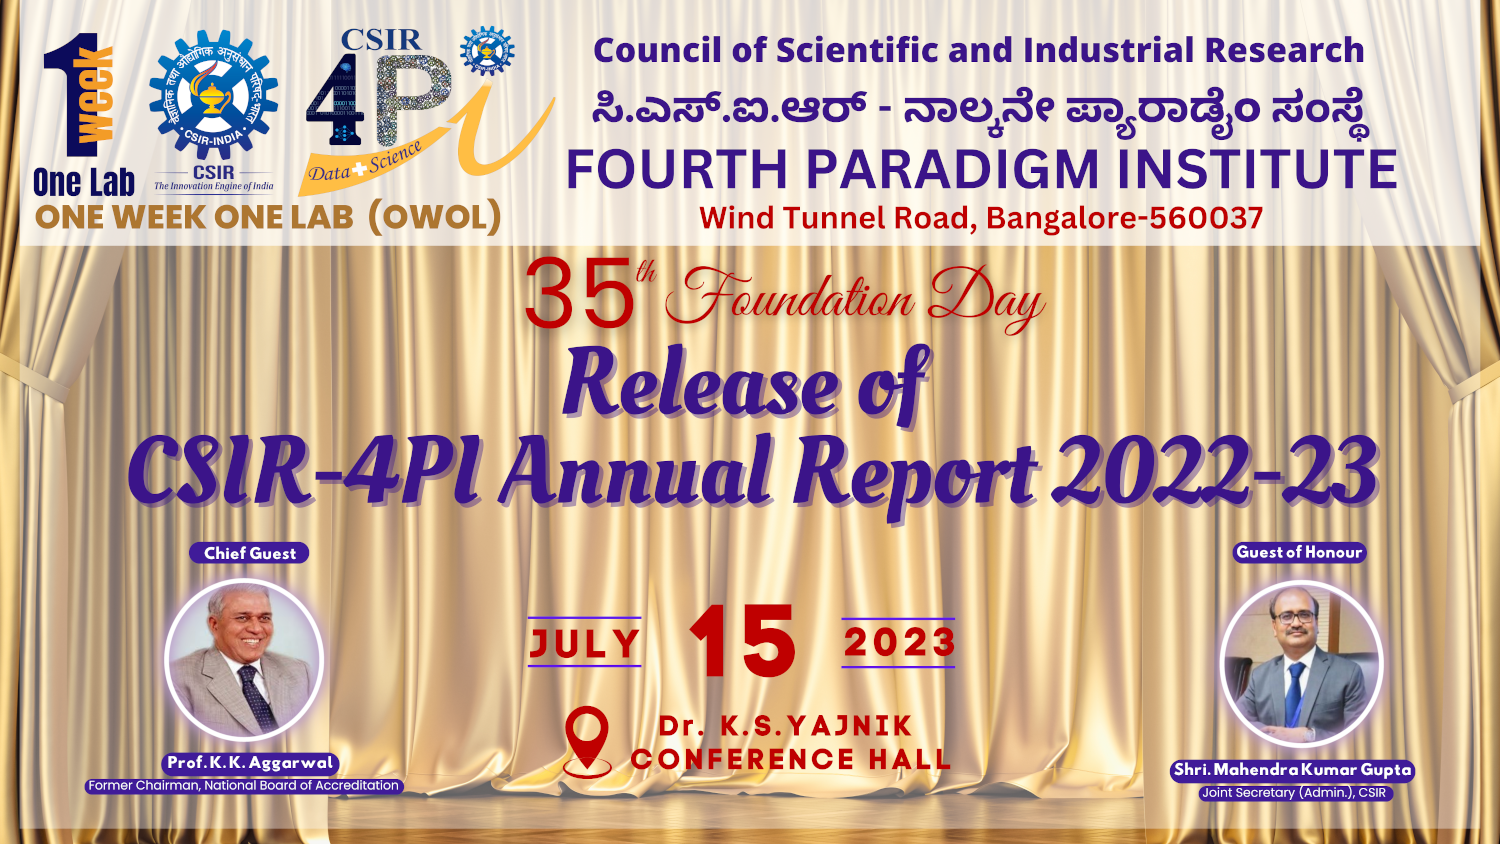 CSIR-4PI Annual Report 2022 - 2023 Released